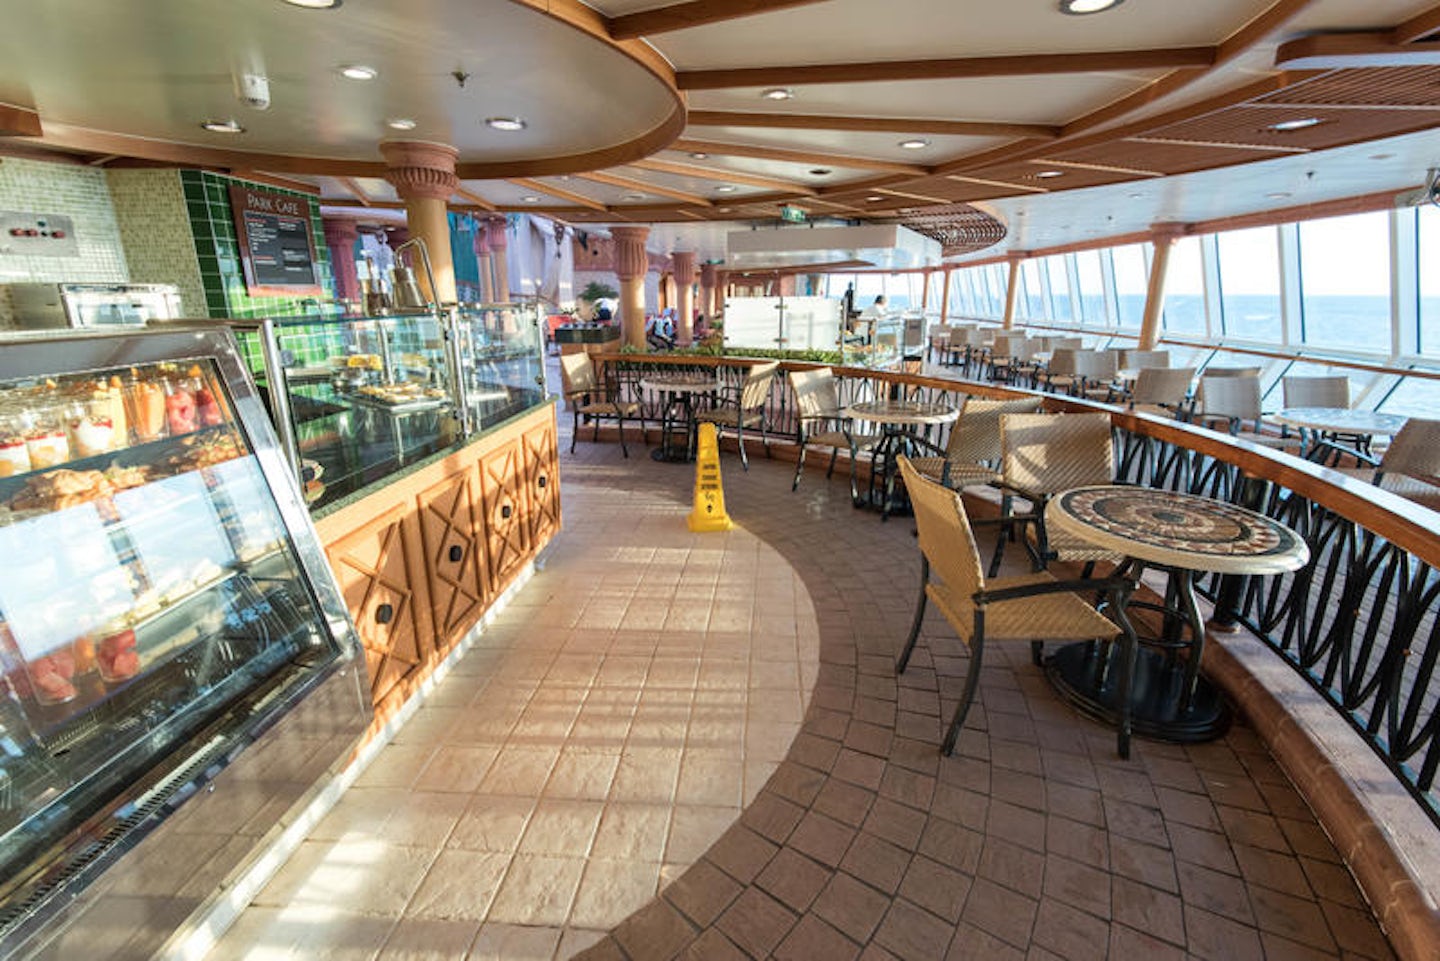 Park Cafe on Brilliance of the Seas